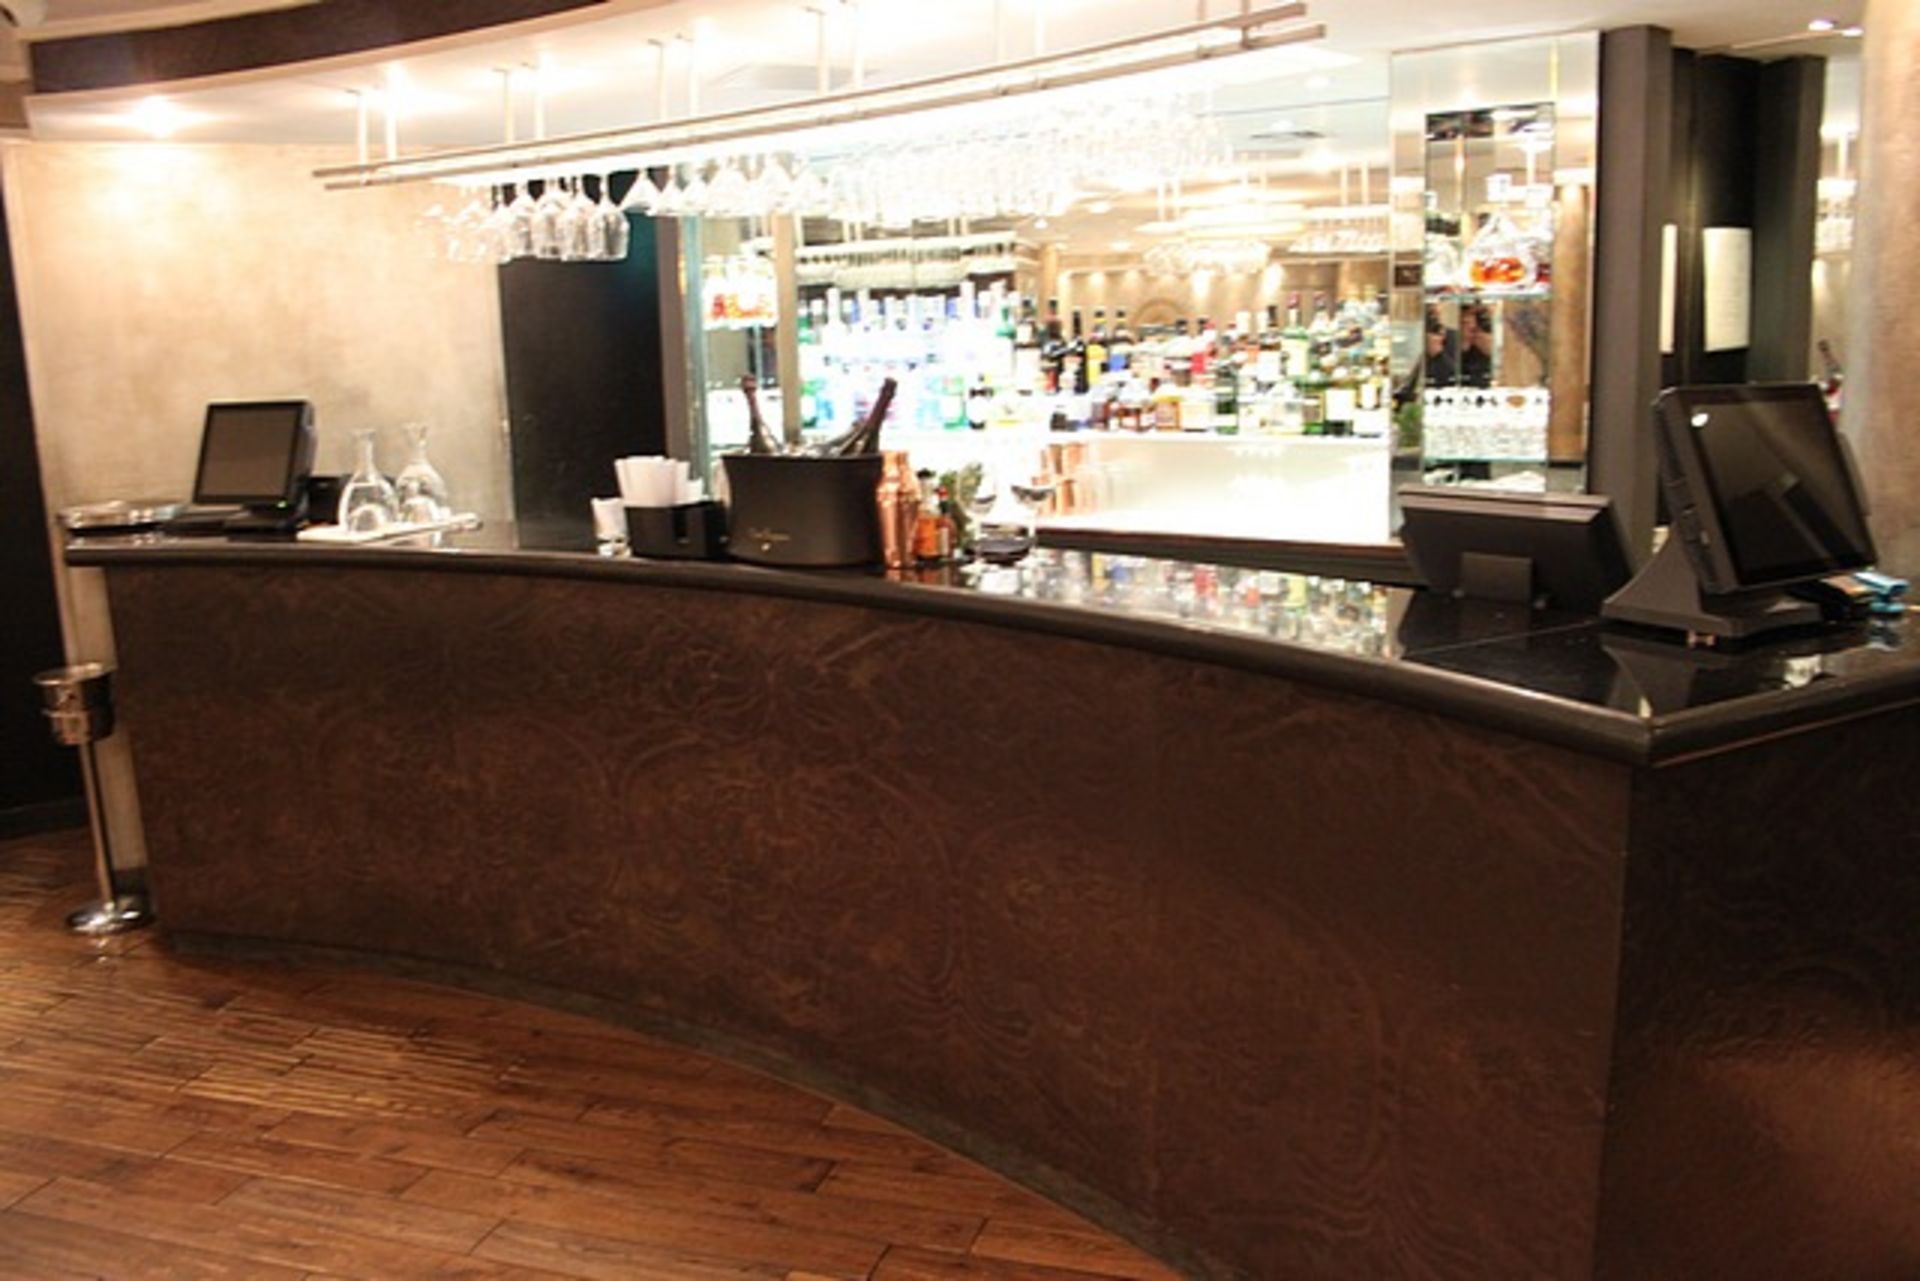 Complete bar counter comprising of a dark wood copper effect laminated front bar with honed marble